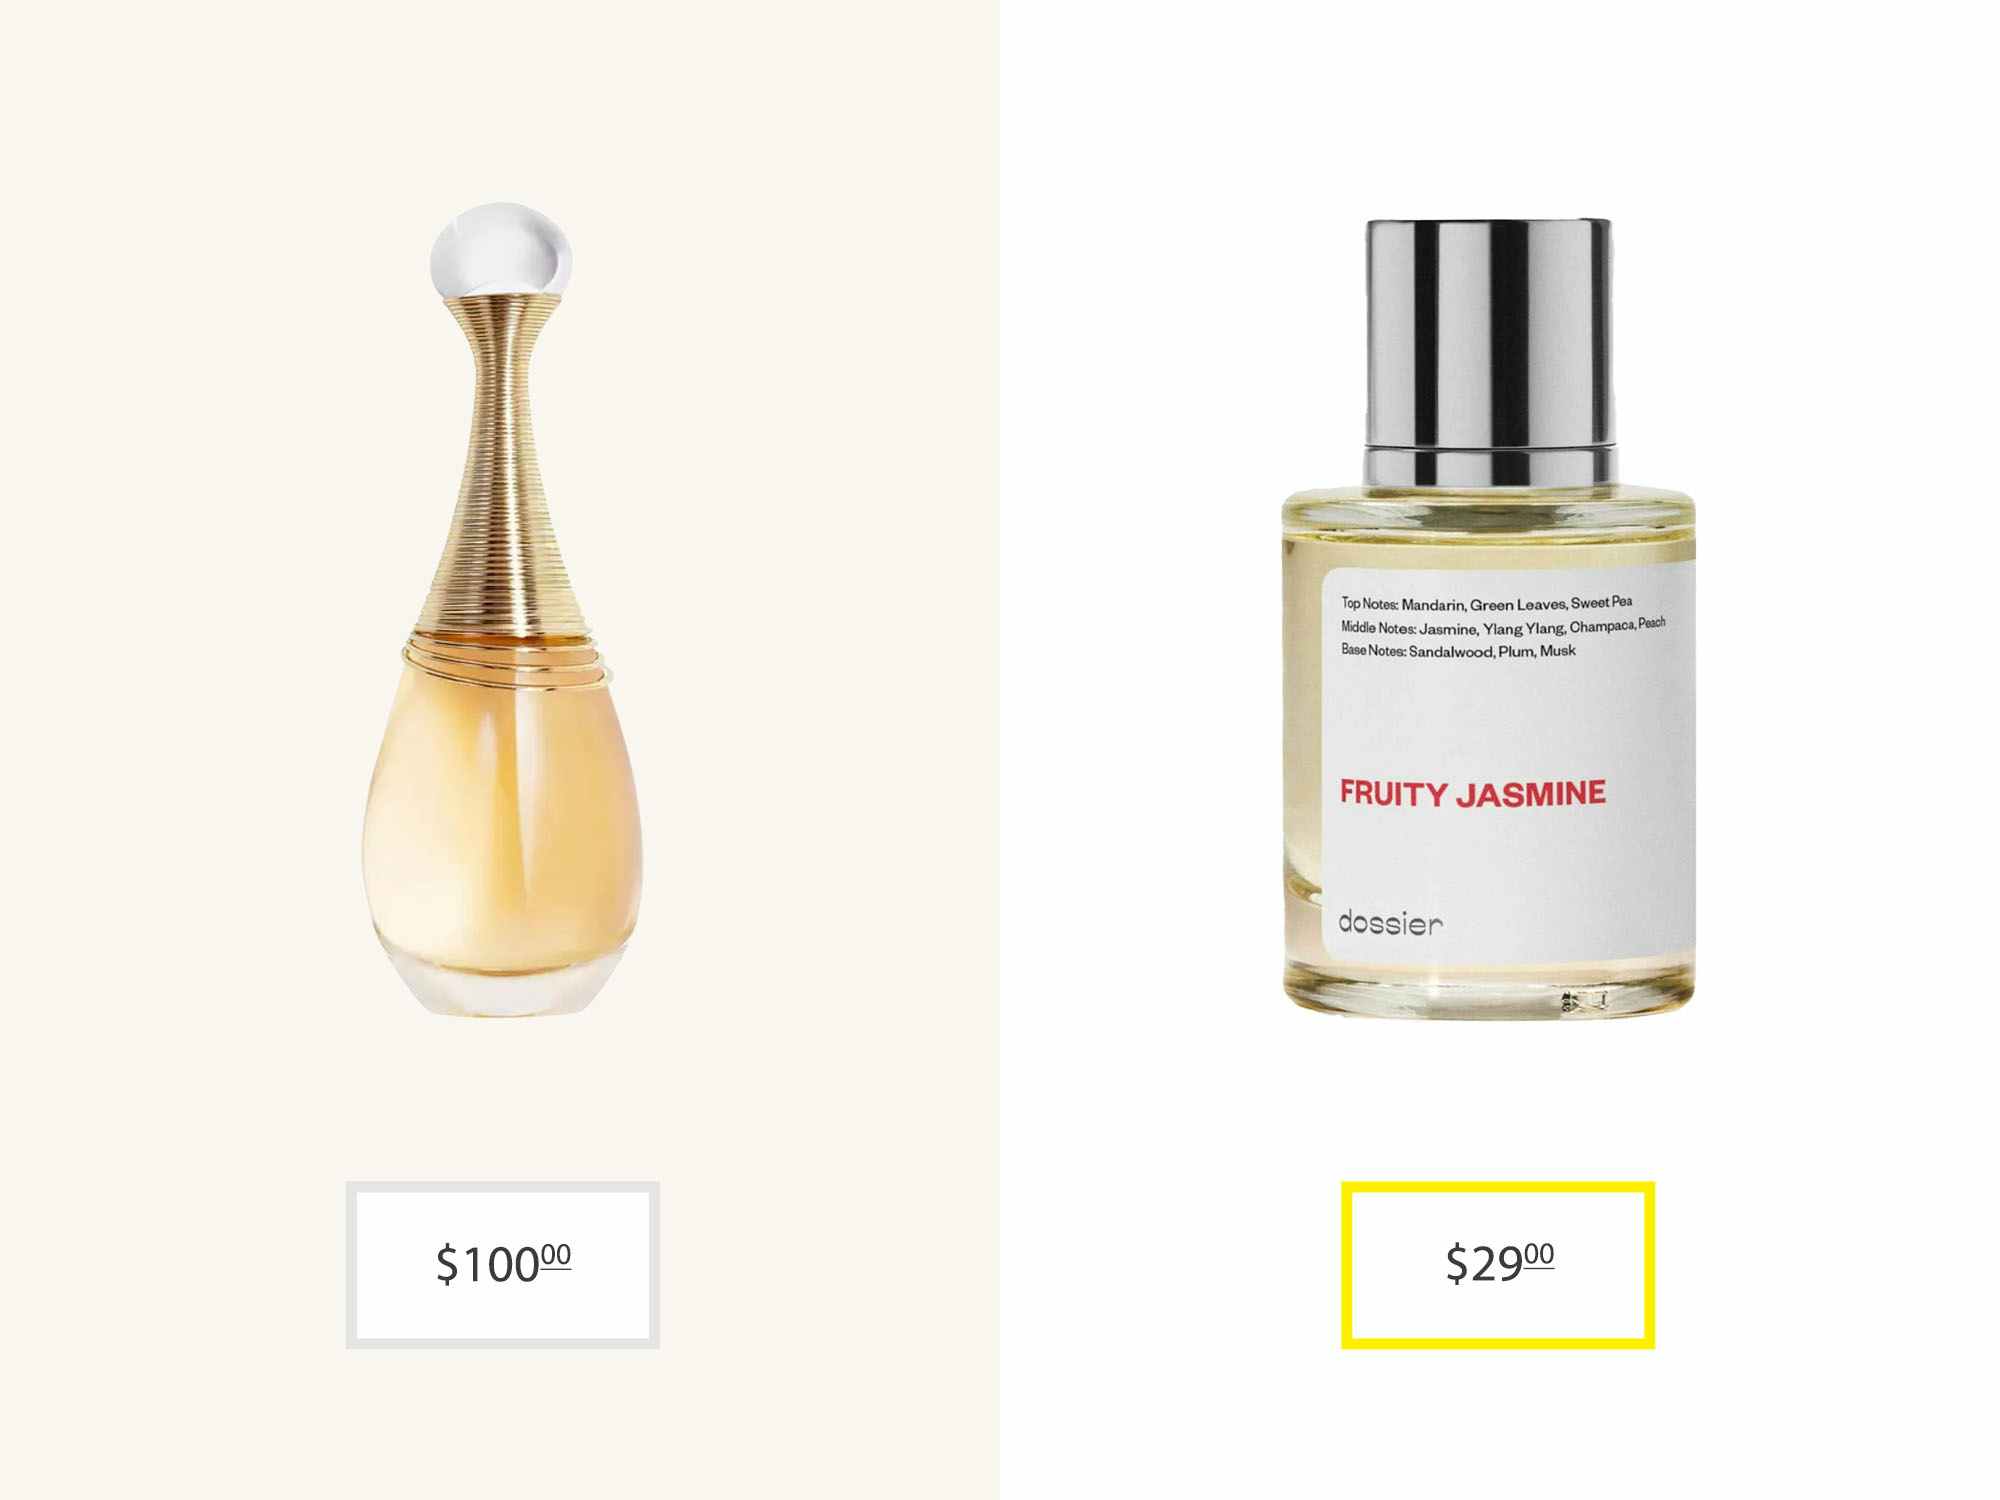 J'adore fragrance next to the dossier fruity jasmine for price comparision